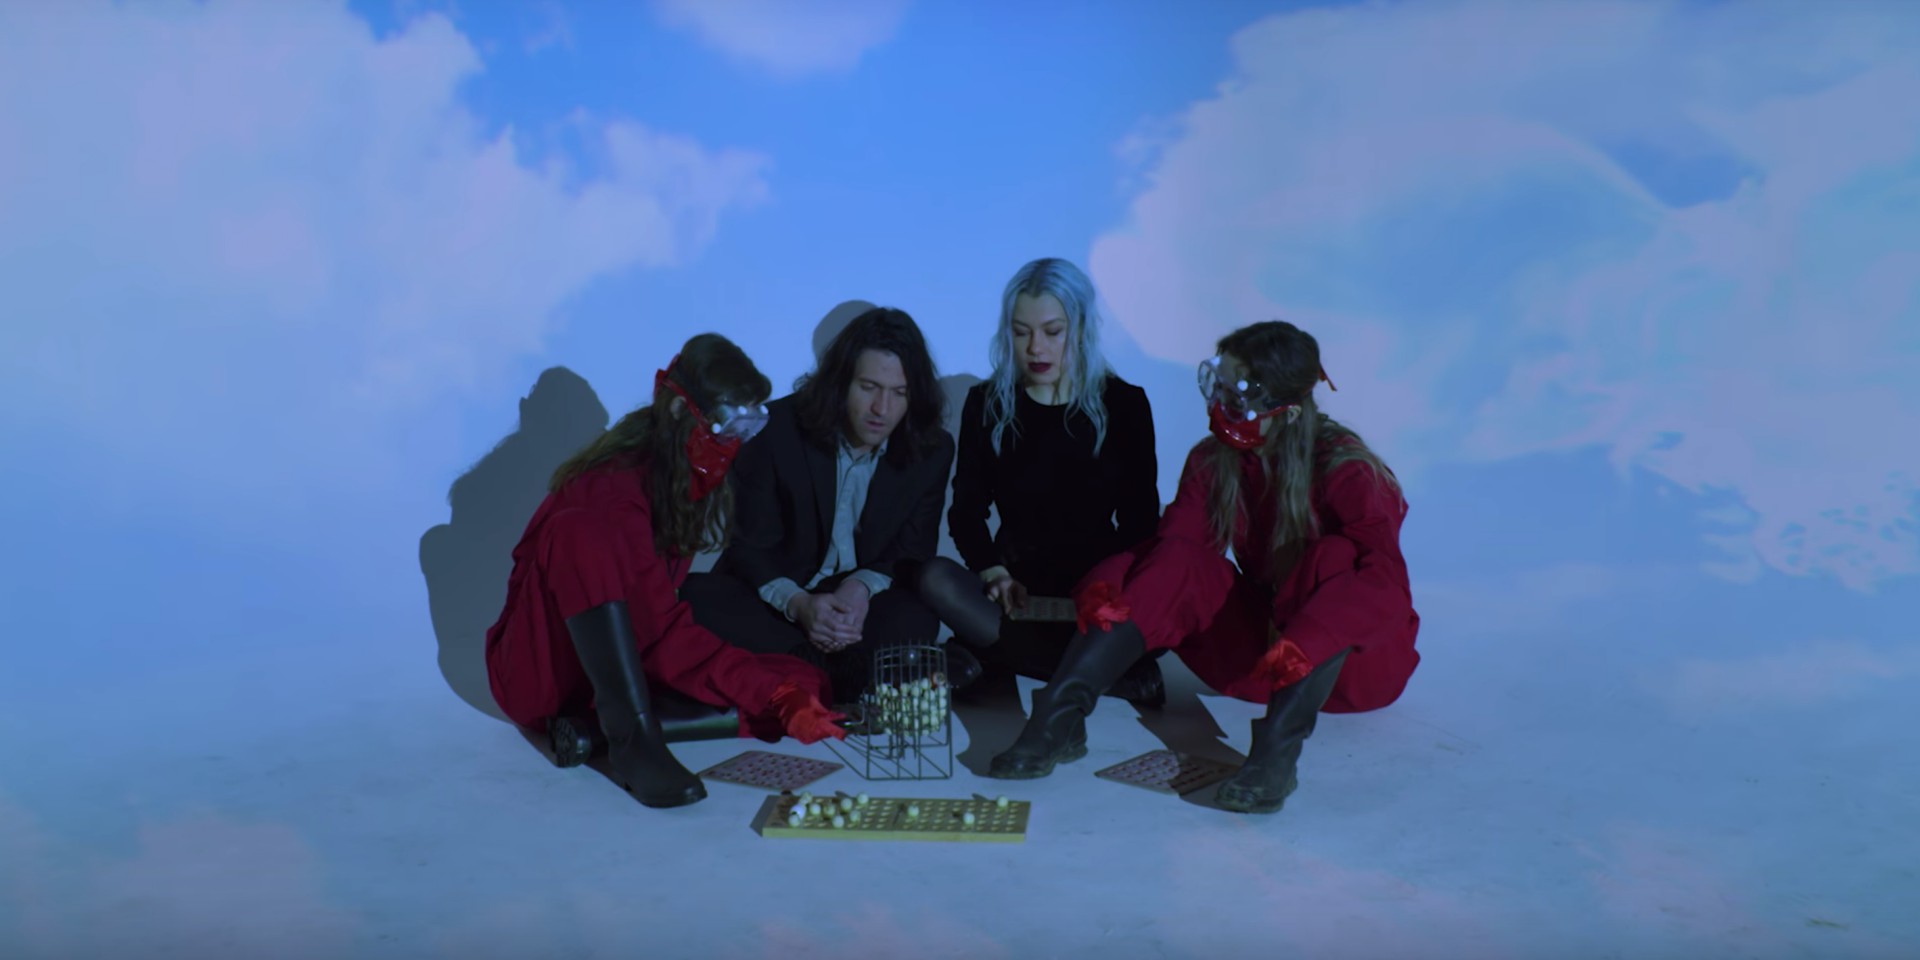 Better Oblivion Community Center plays for a cult in 'Dylan Thomas' music video directed by Japanese Breakfast – watch